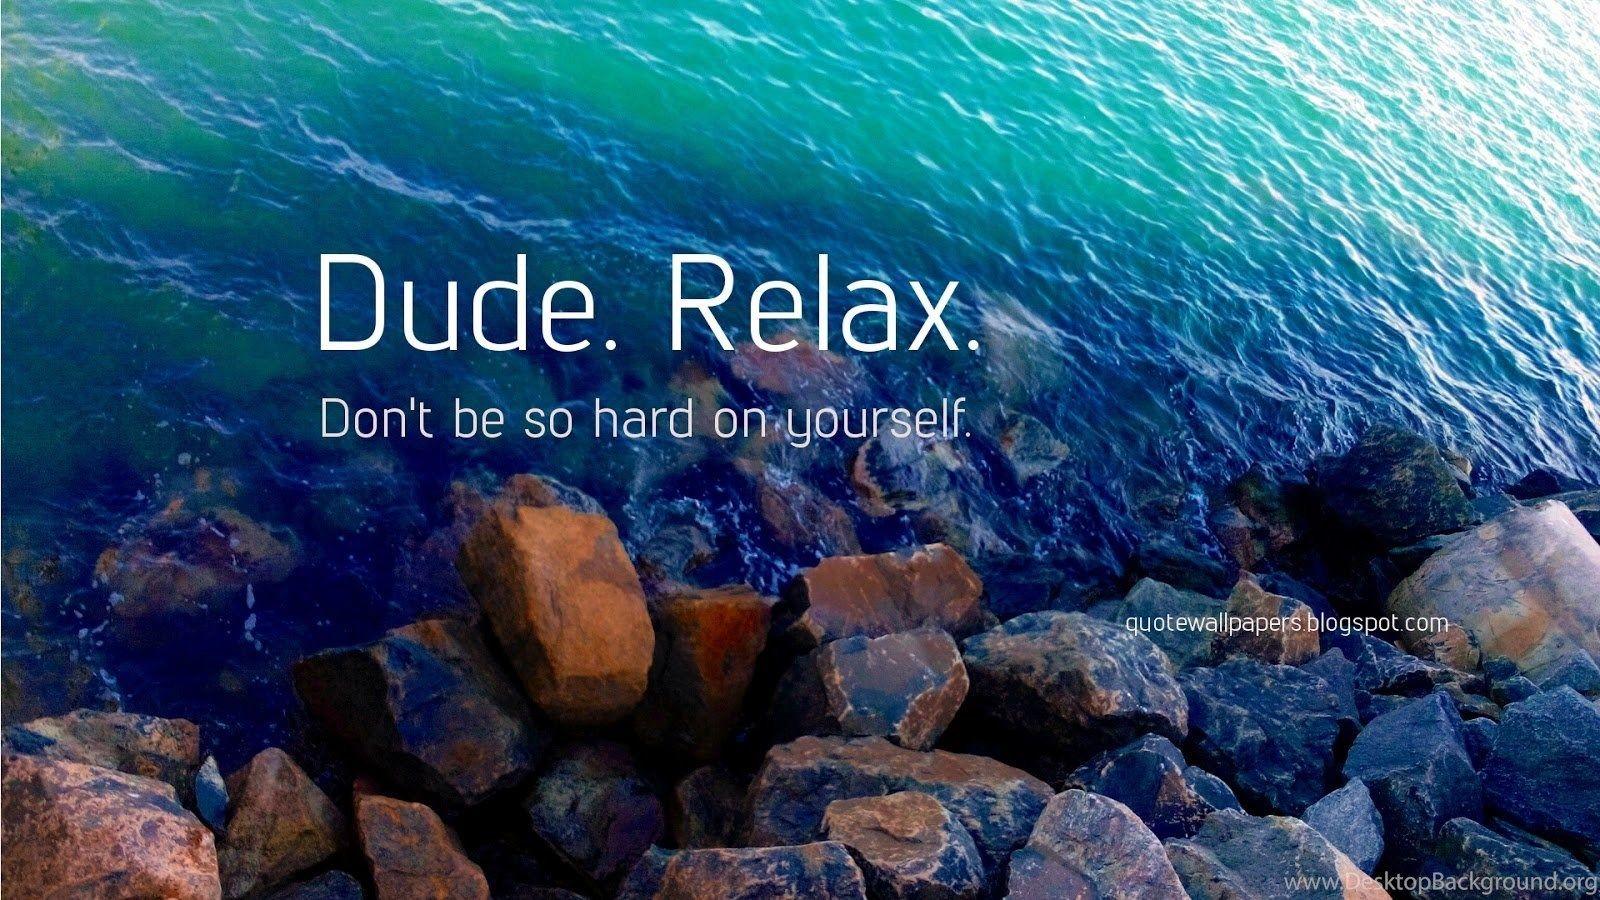 Quote Wallpaper HD: Dude Relax! Dont Be So Hard On Yourself